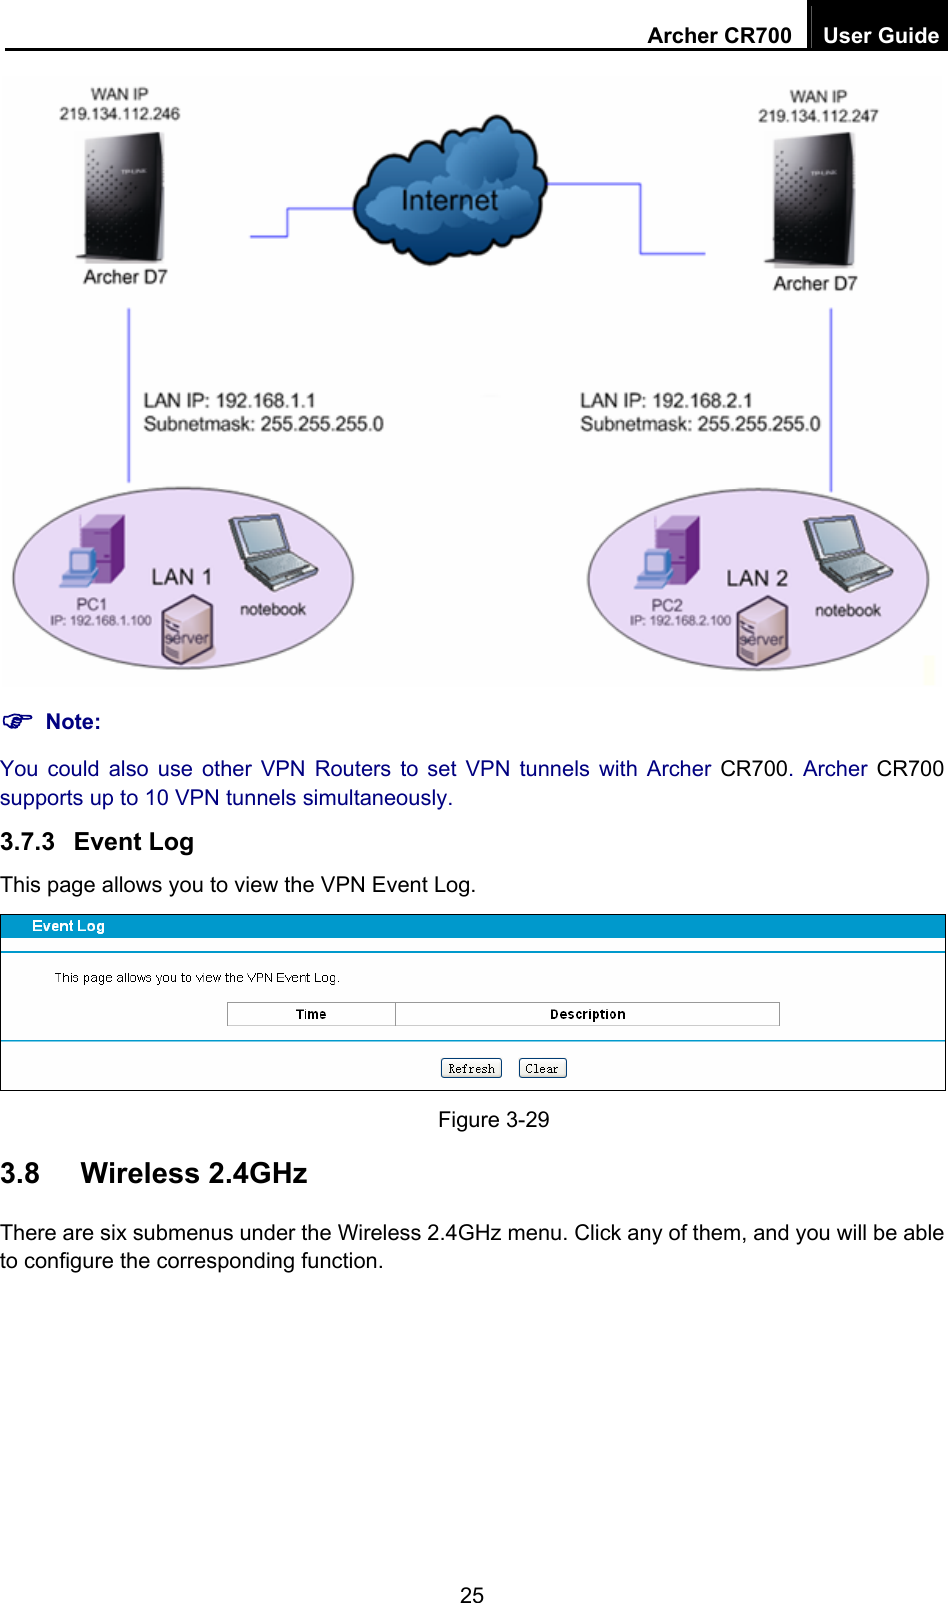 Archer CR700  User Guide 25  ) Note: You could also use other VPN Routers to set VPN tunnels with Archer CR700. Archer CR700 supports up to 10 VPN tunnels simultaneously. 3.7.3  Event Log This page allows you to view the VPN Event Log.  Figure 3-29   3.8  Wireless 2.4GHz There are six submenus under the Wireless 2.4GHz menu. Click any of them, and you will be able to configure the corresponding function.    